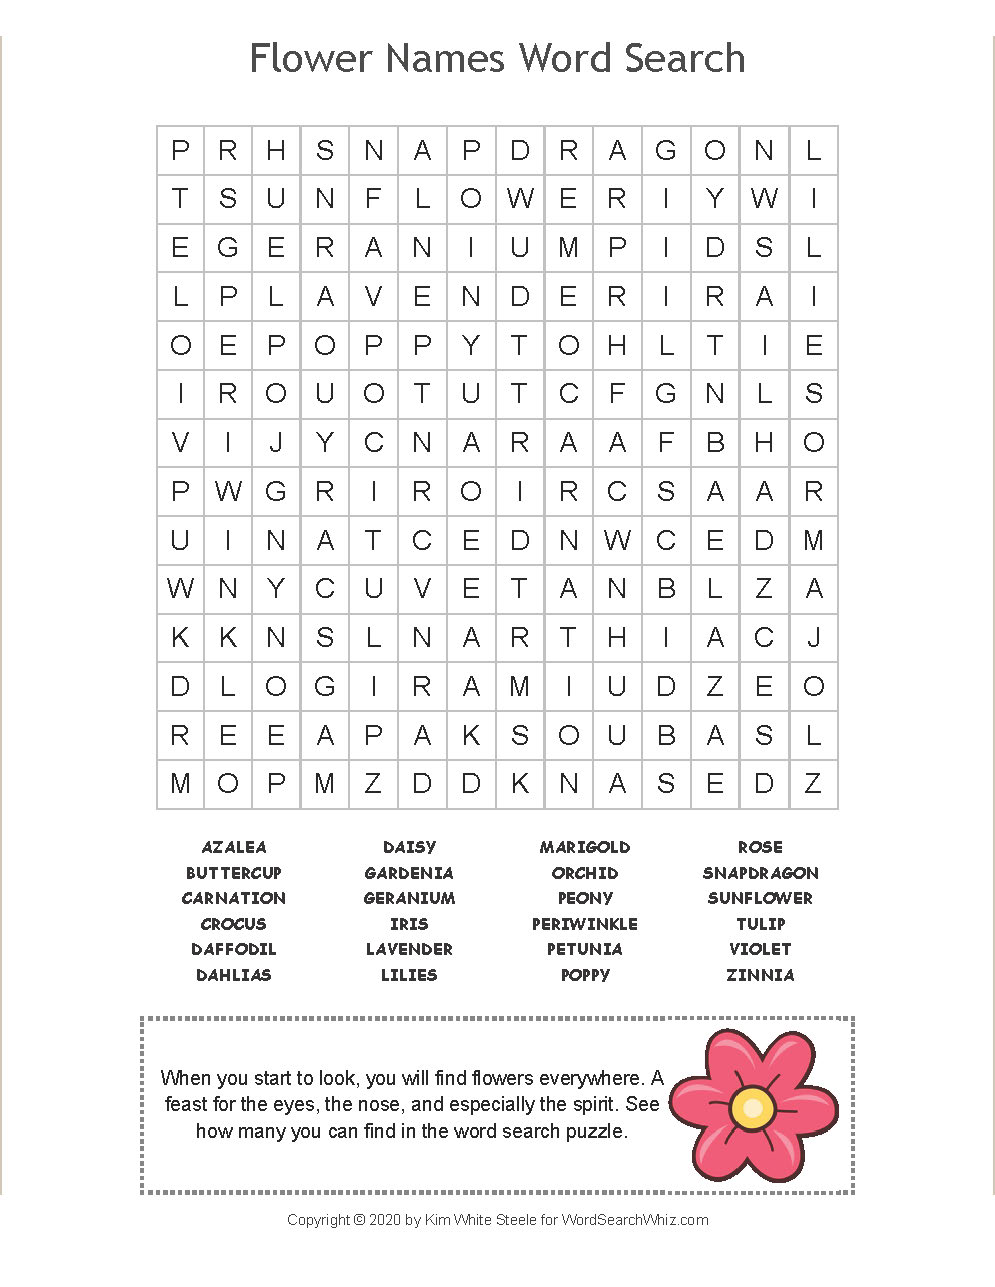 flower-names-word-search